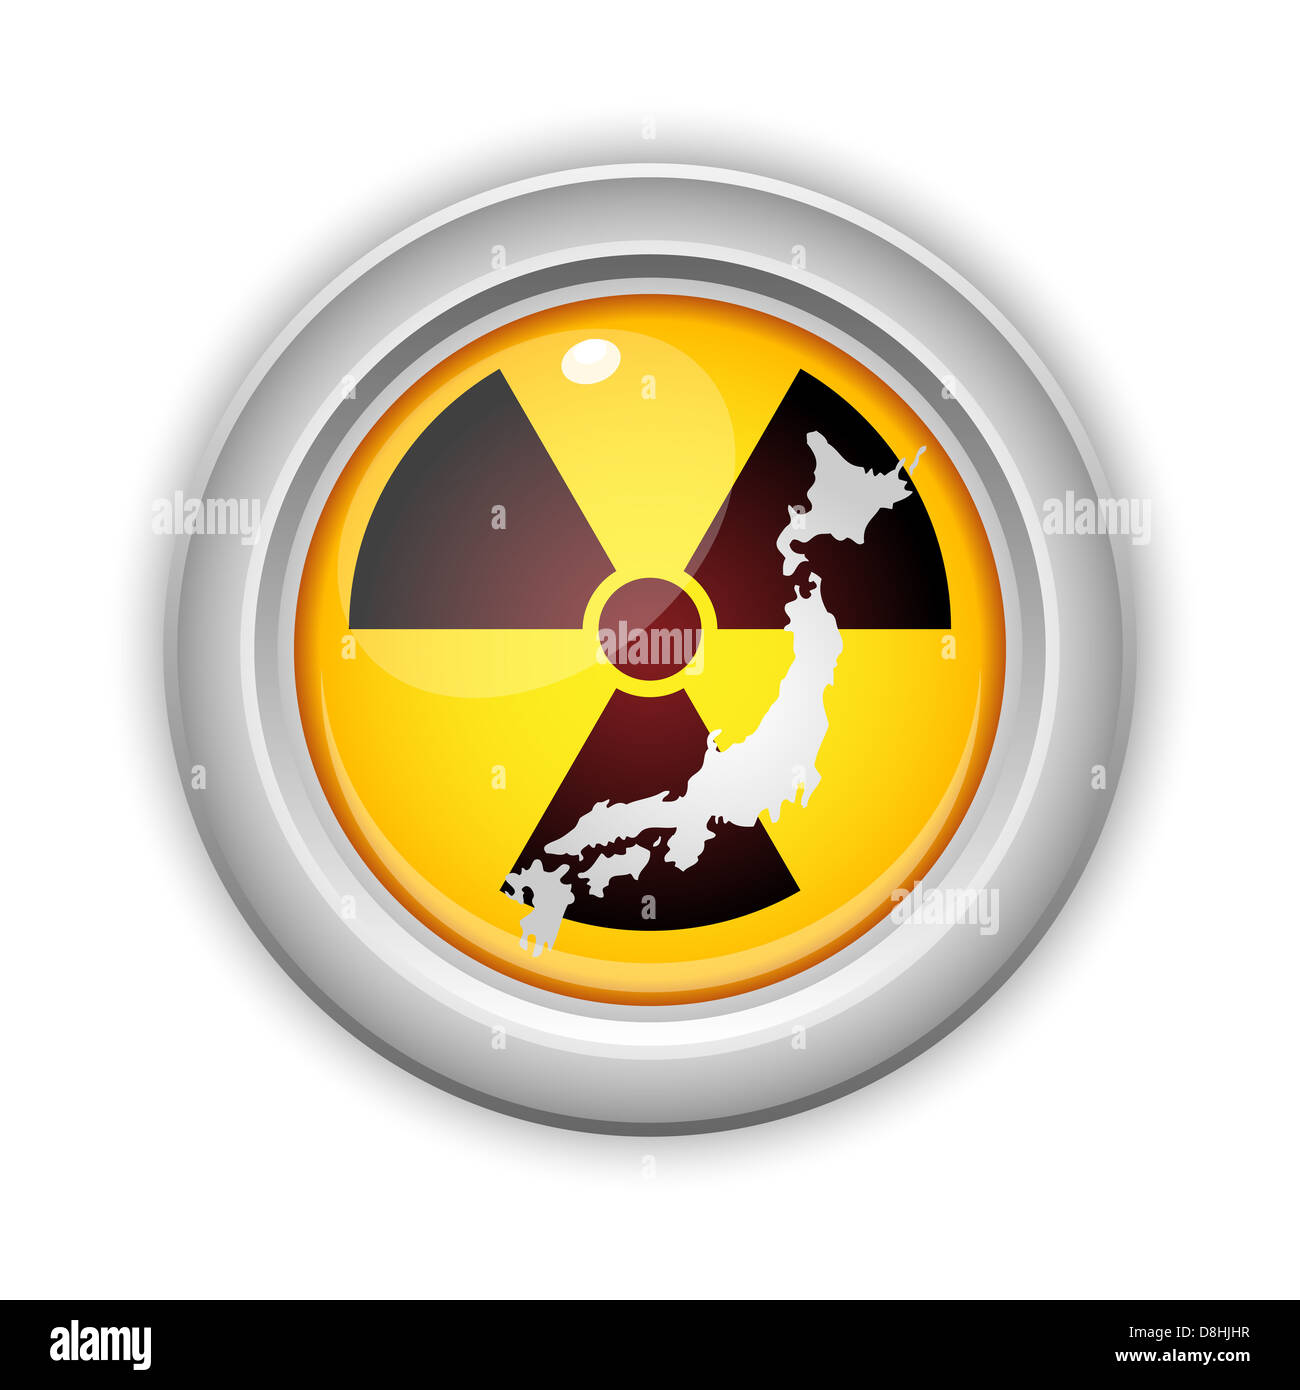 Vector - Japan Nuclear Disaster Yellow Button Stock Photo